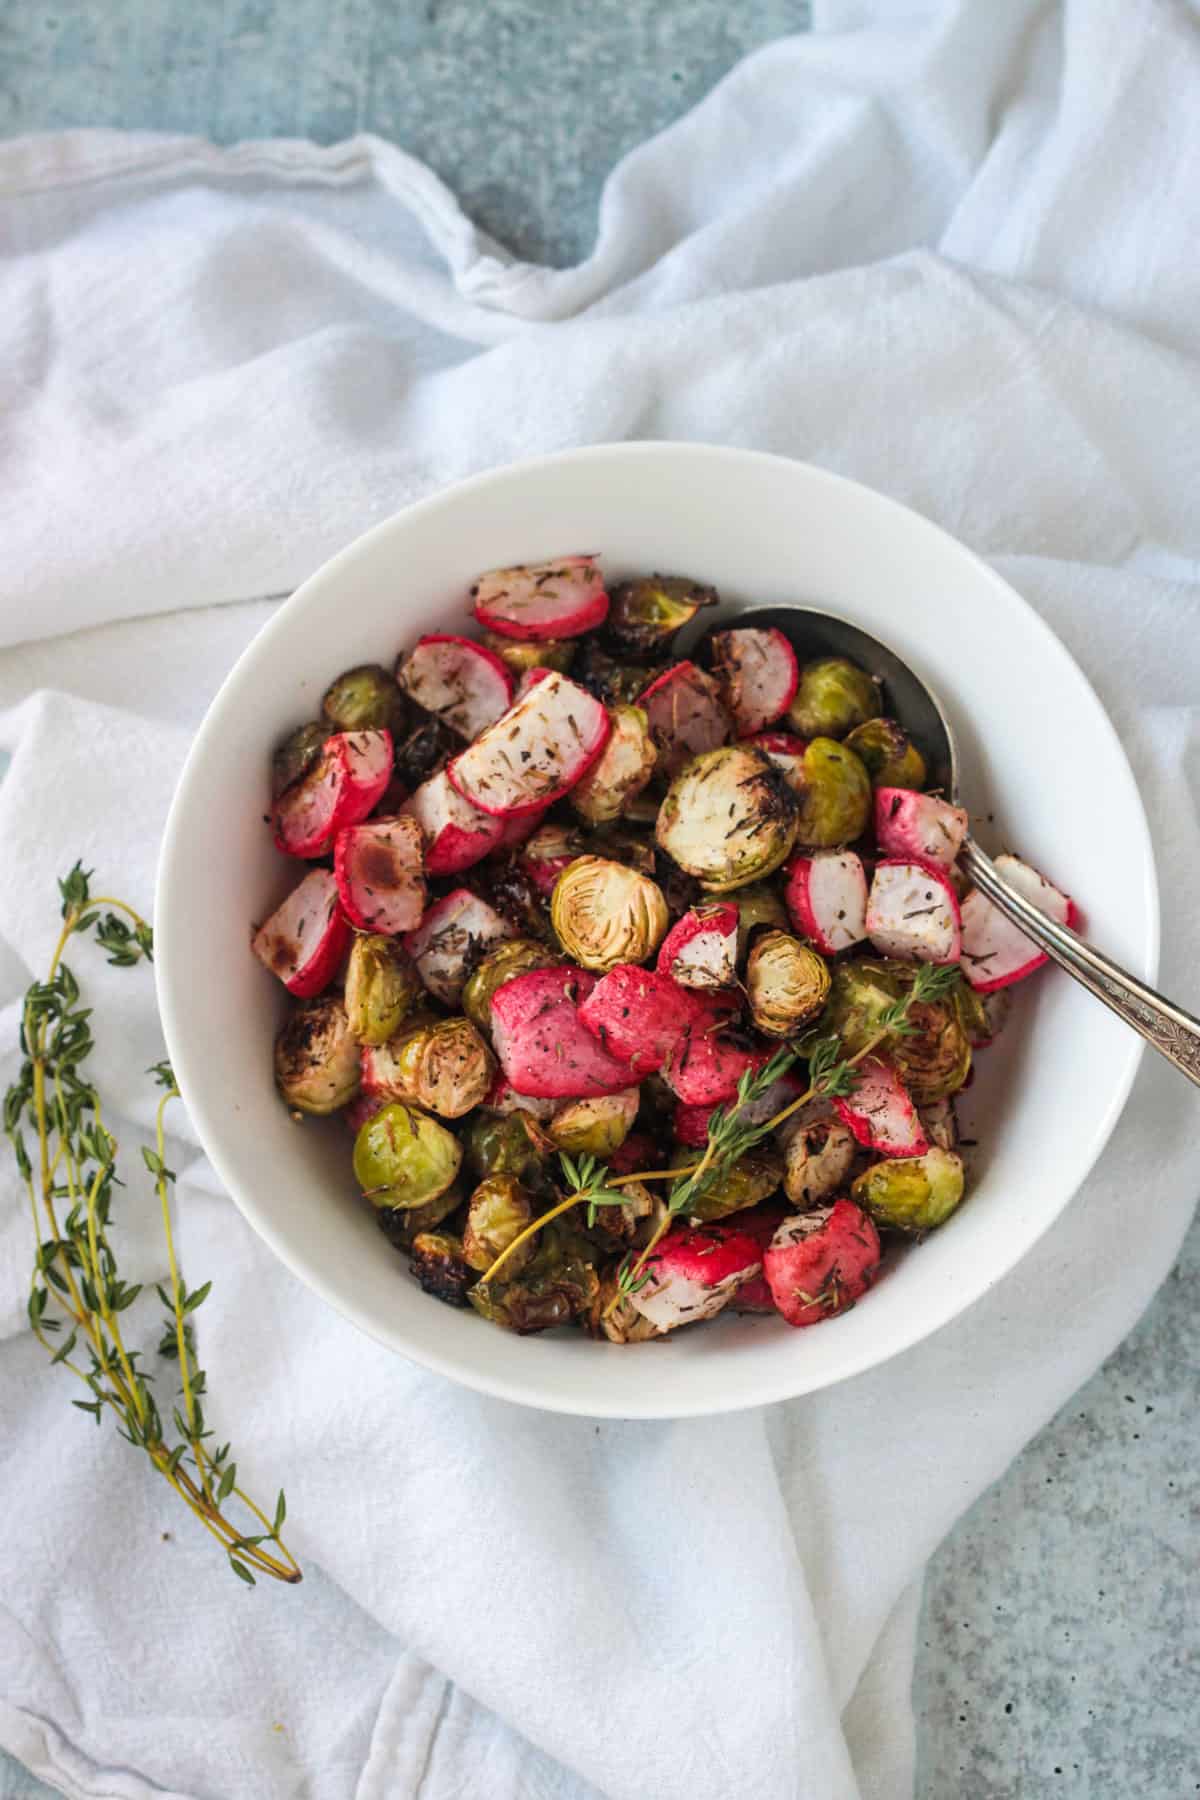 Oven roasted radishes and brussels sprouts in a white bowl with a serving spoon.